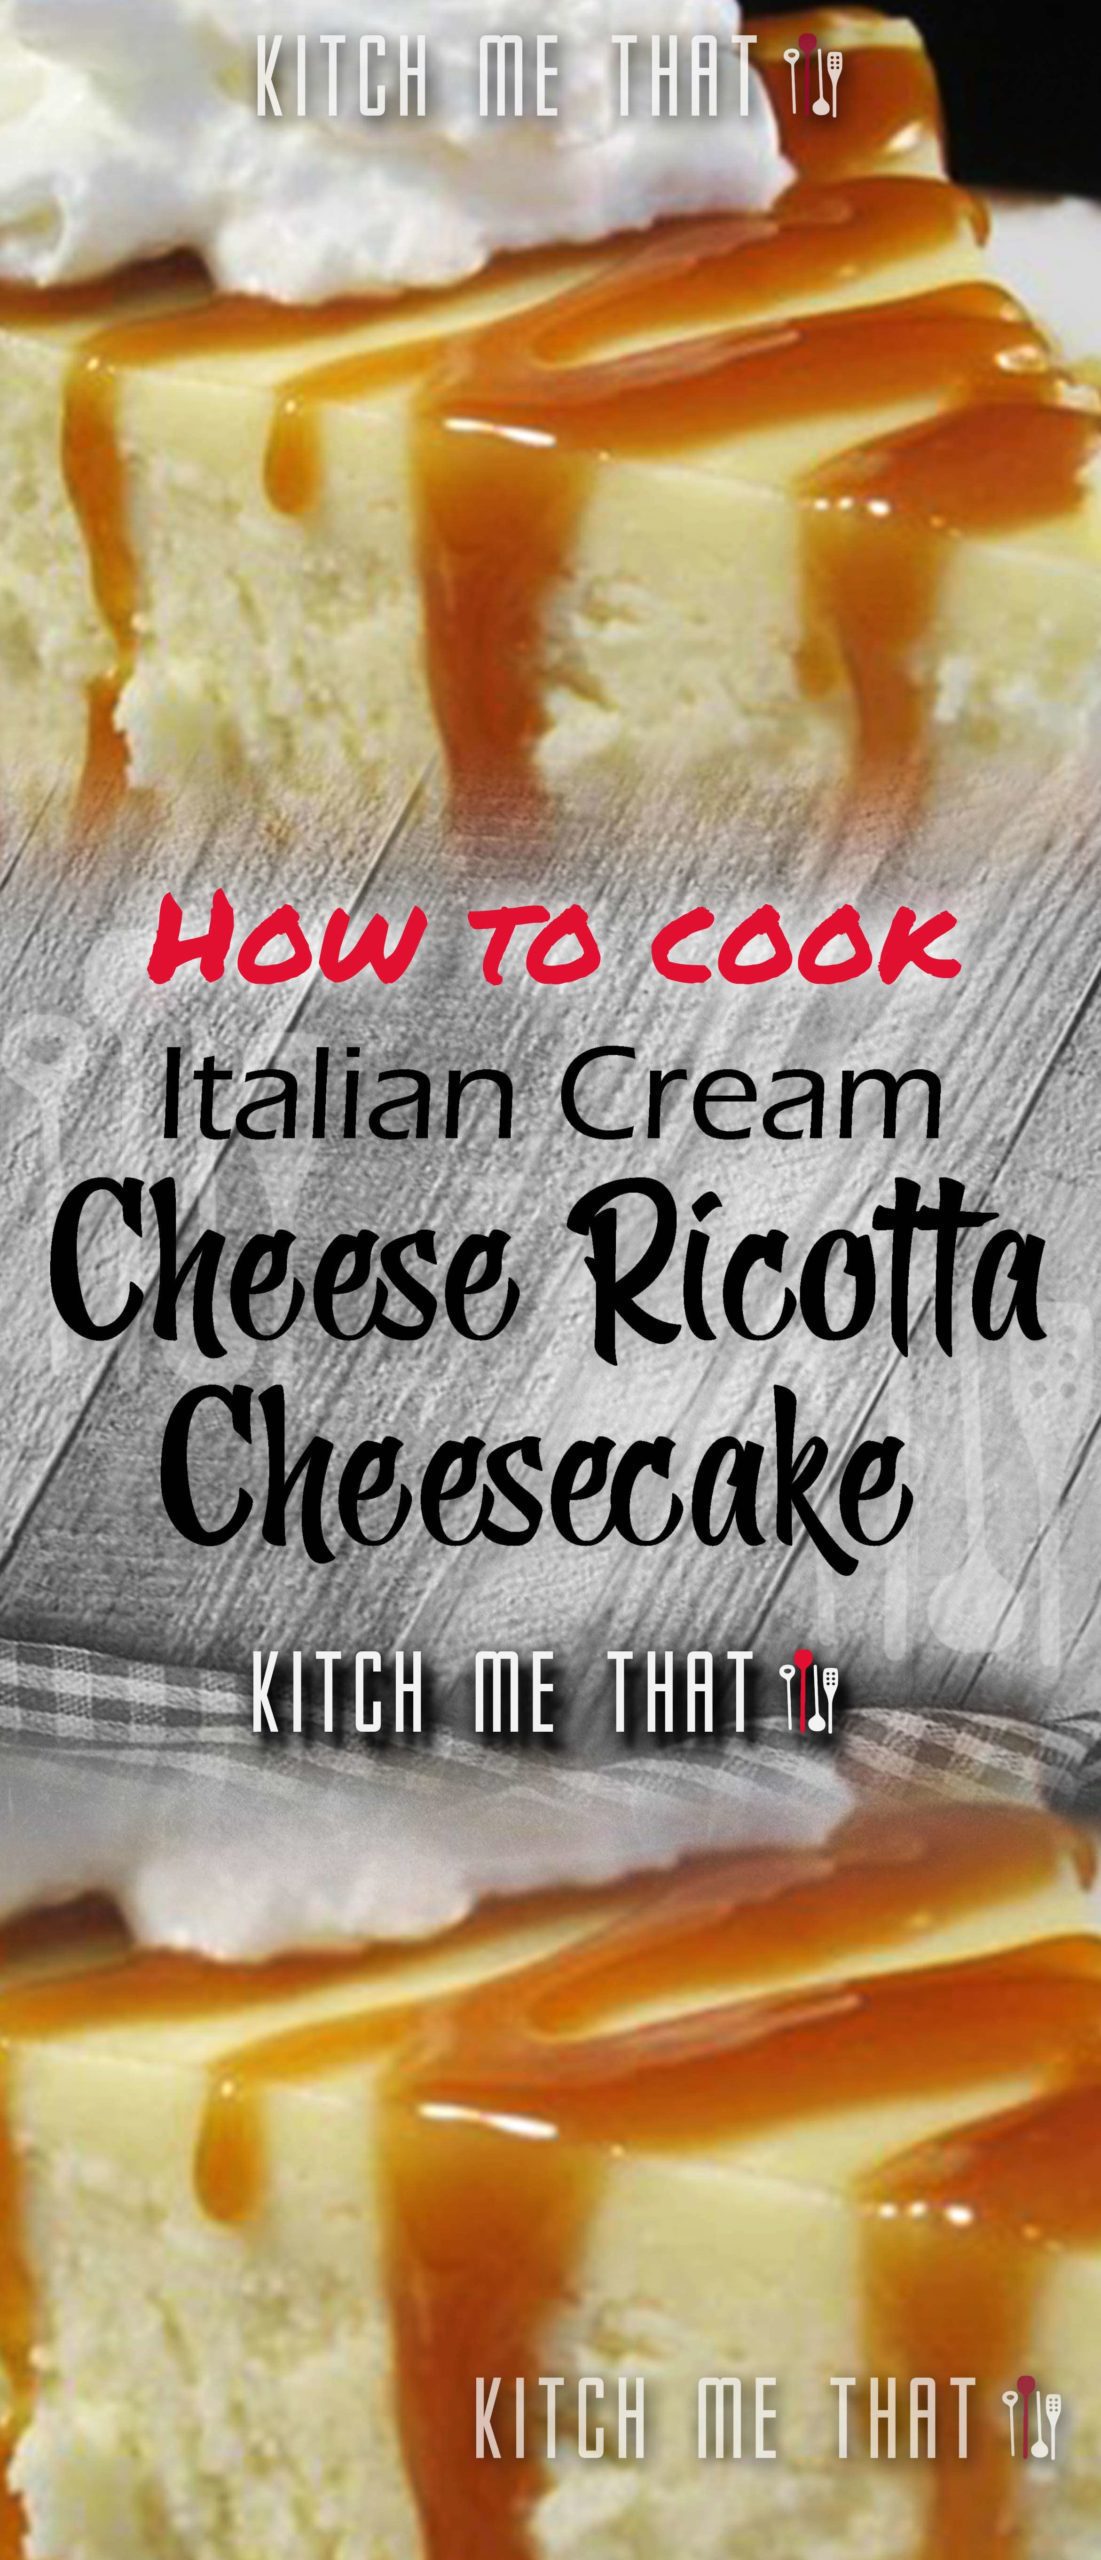 We Can’T Get Enough Of This Italian Cream Cheese And Ricotta Cheesecake